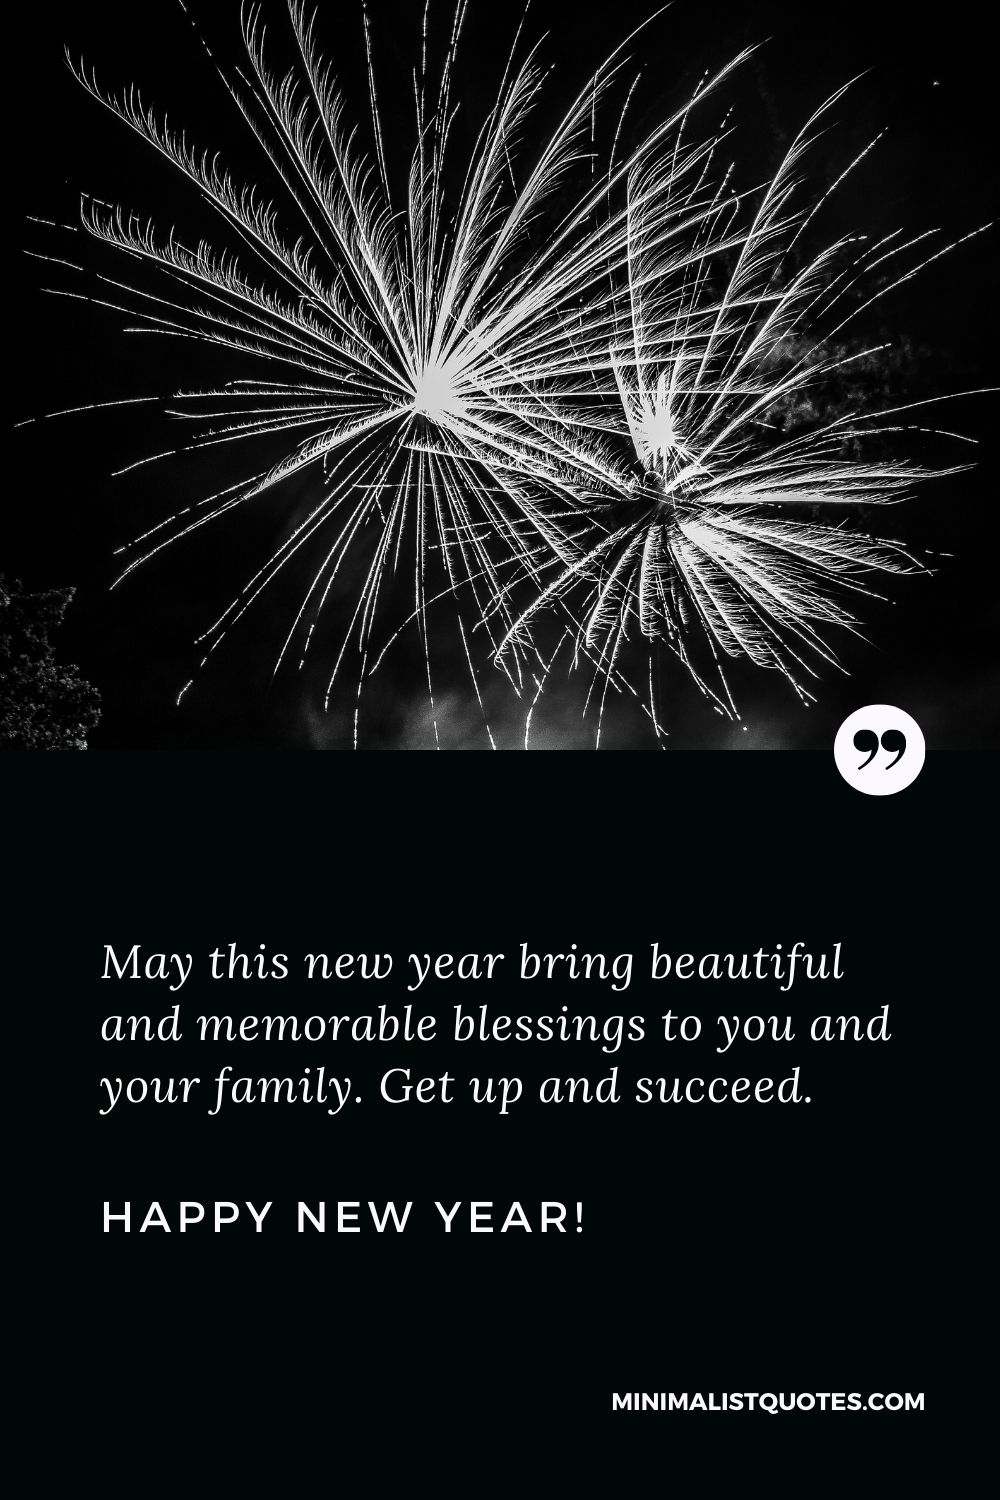 Happy new year message 2022: May this new year bring beautiful and memorable blessings to you and your family. Get up and succeed. Happy New Year!